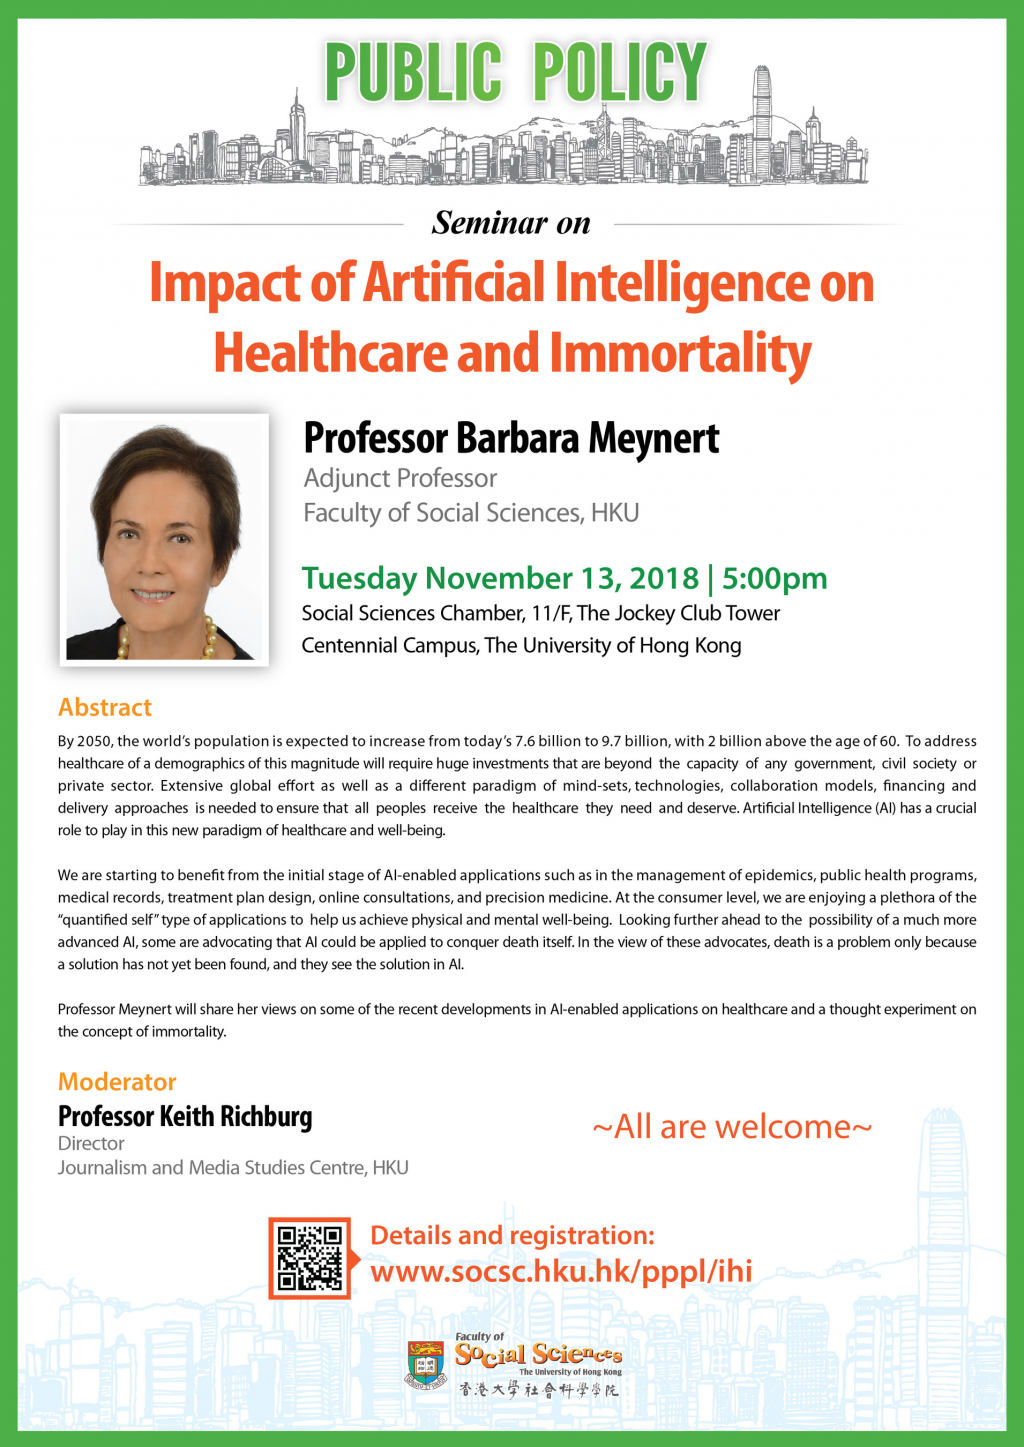 Public Policy Seminar on Impact of Artificial Intelligence on Healthcare and Immortality